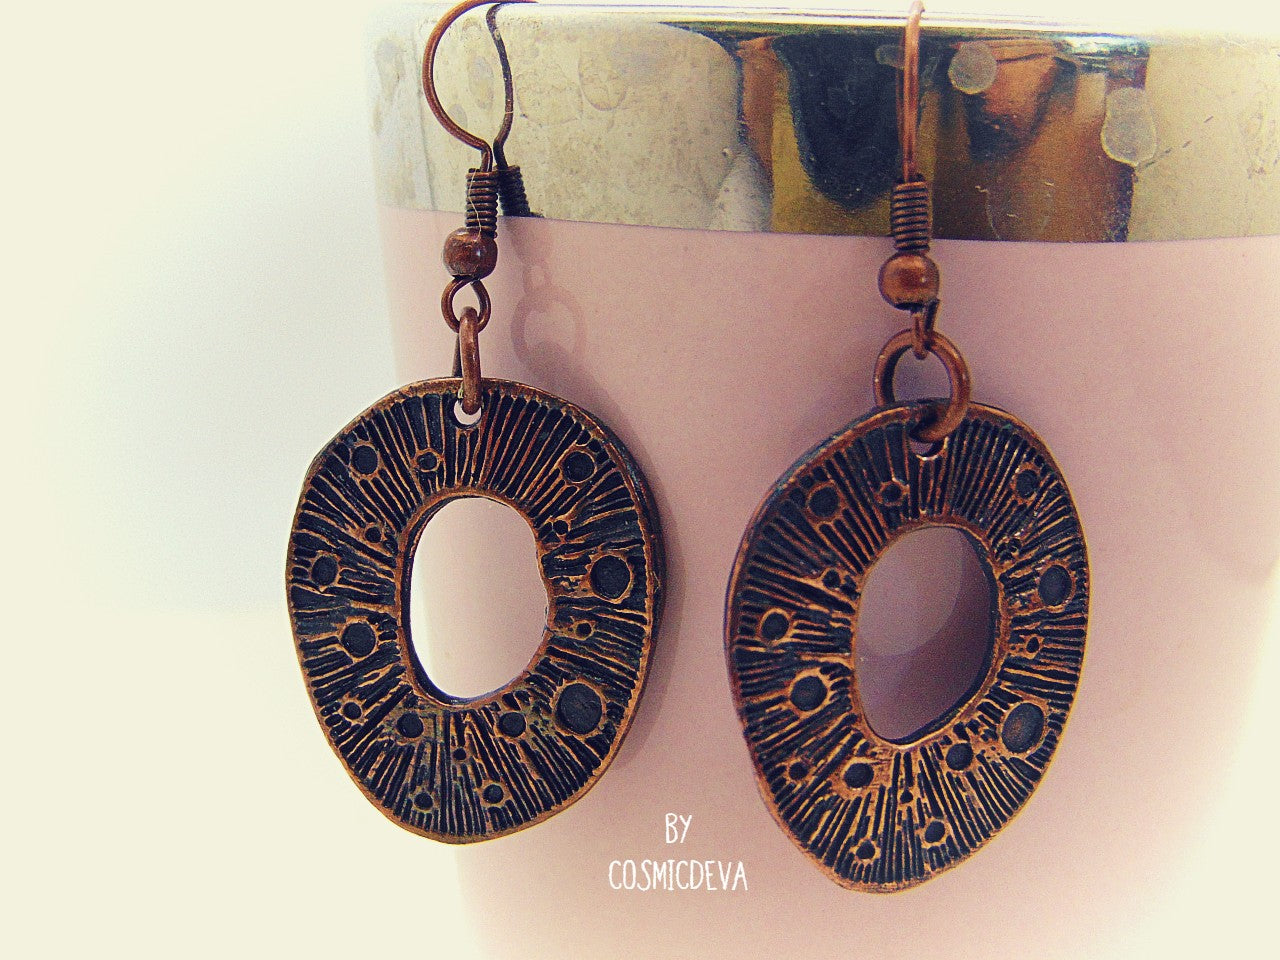 These organic copper dangle earrings are the perfect pick for any season. Handcrafted in the studio, they feature a unique organic texture and warm patinated copper color that can't be found anywhere else. Lightweight and comfortable to wear, no two pairs are ever alike!